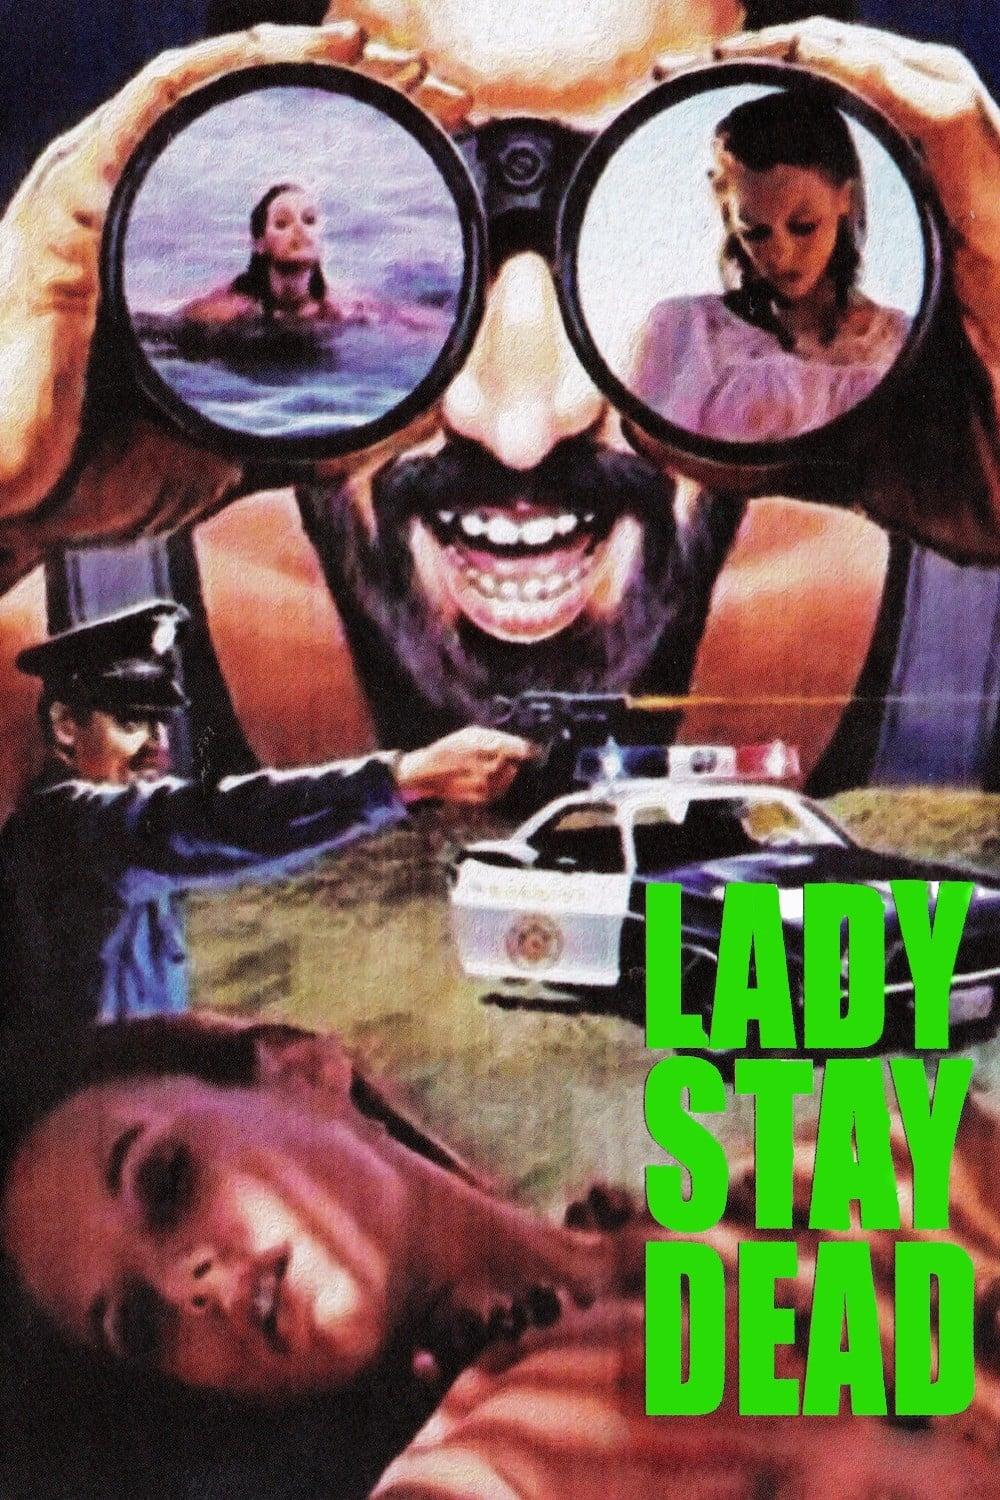 Lady Stay Dead poster